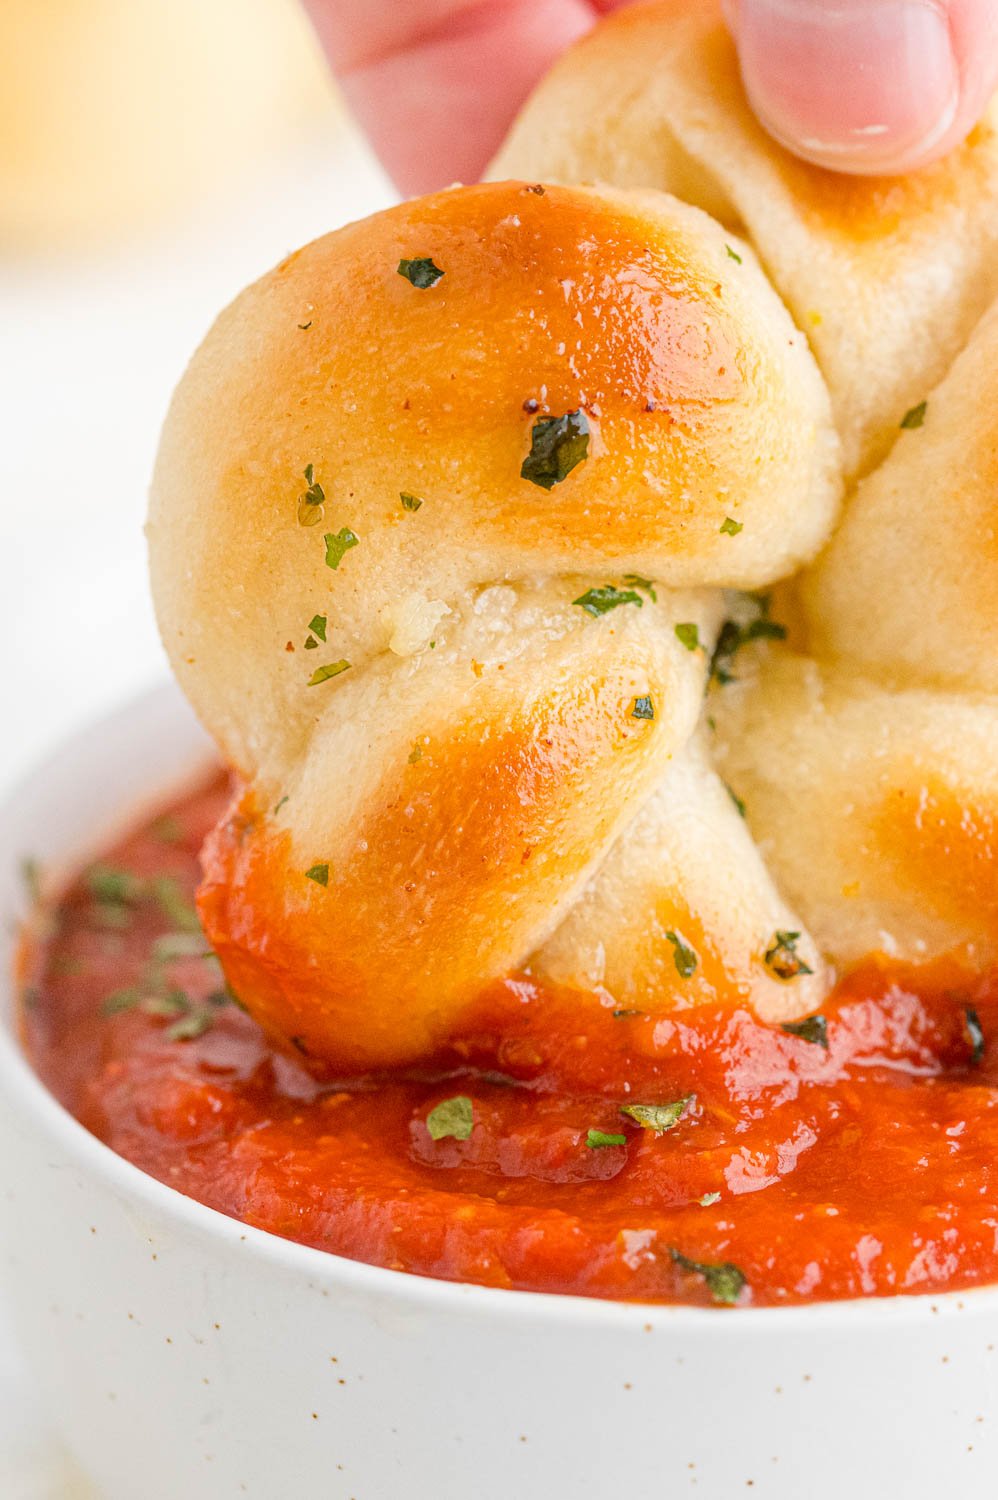 A close up picture of a pizza dough garlic knot being dipped into pizza sauce.